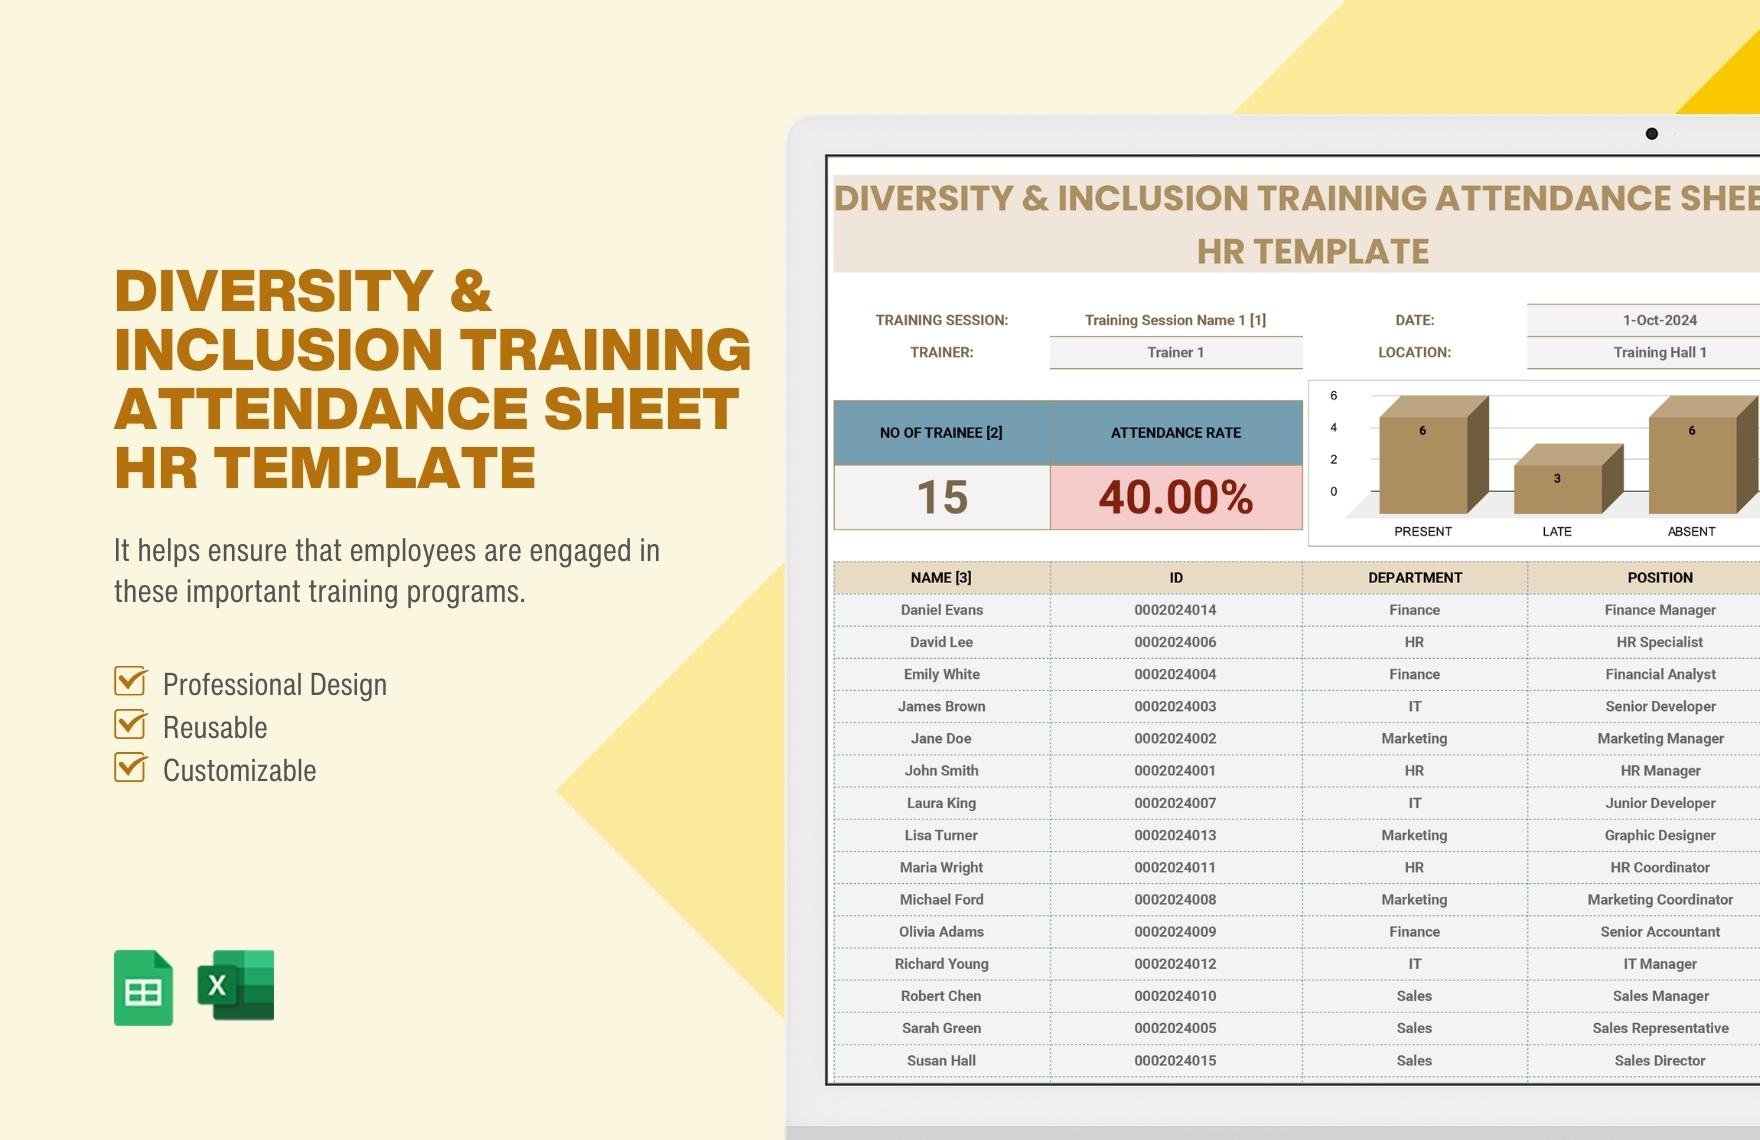 Diversity & Inclusion Training Attendance Sheet HR Template in Excel, Google Sheets